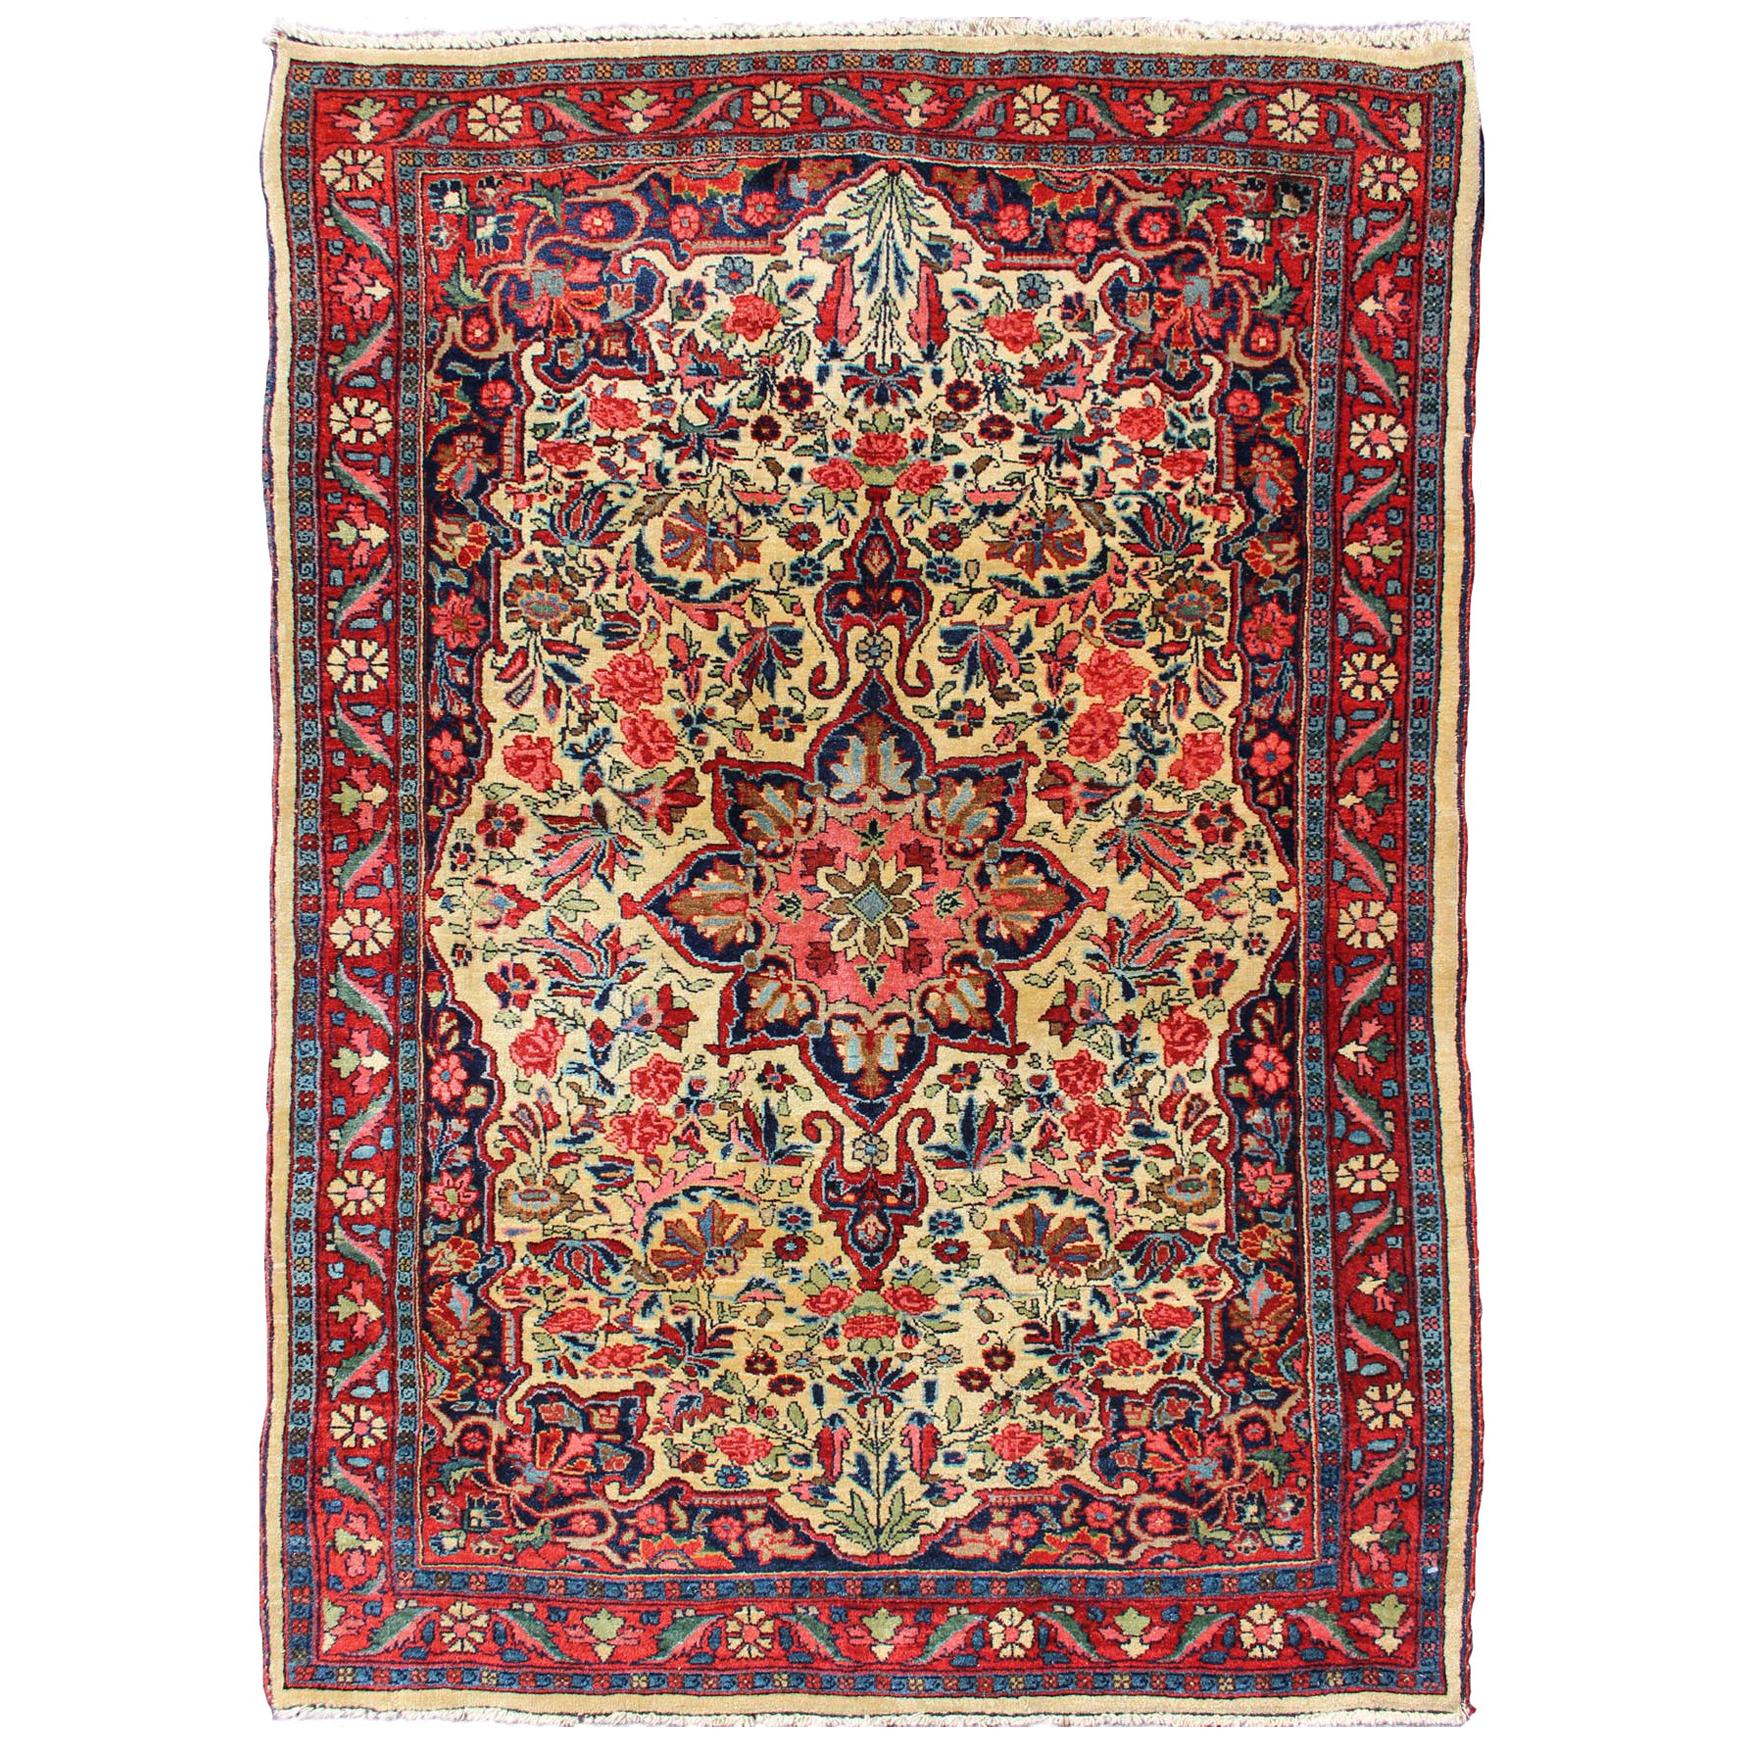 Antique Persian Medallion Bidjar Colorful Rug In Ivory, Navy Blue and Red